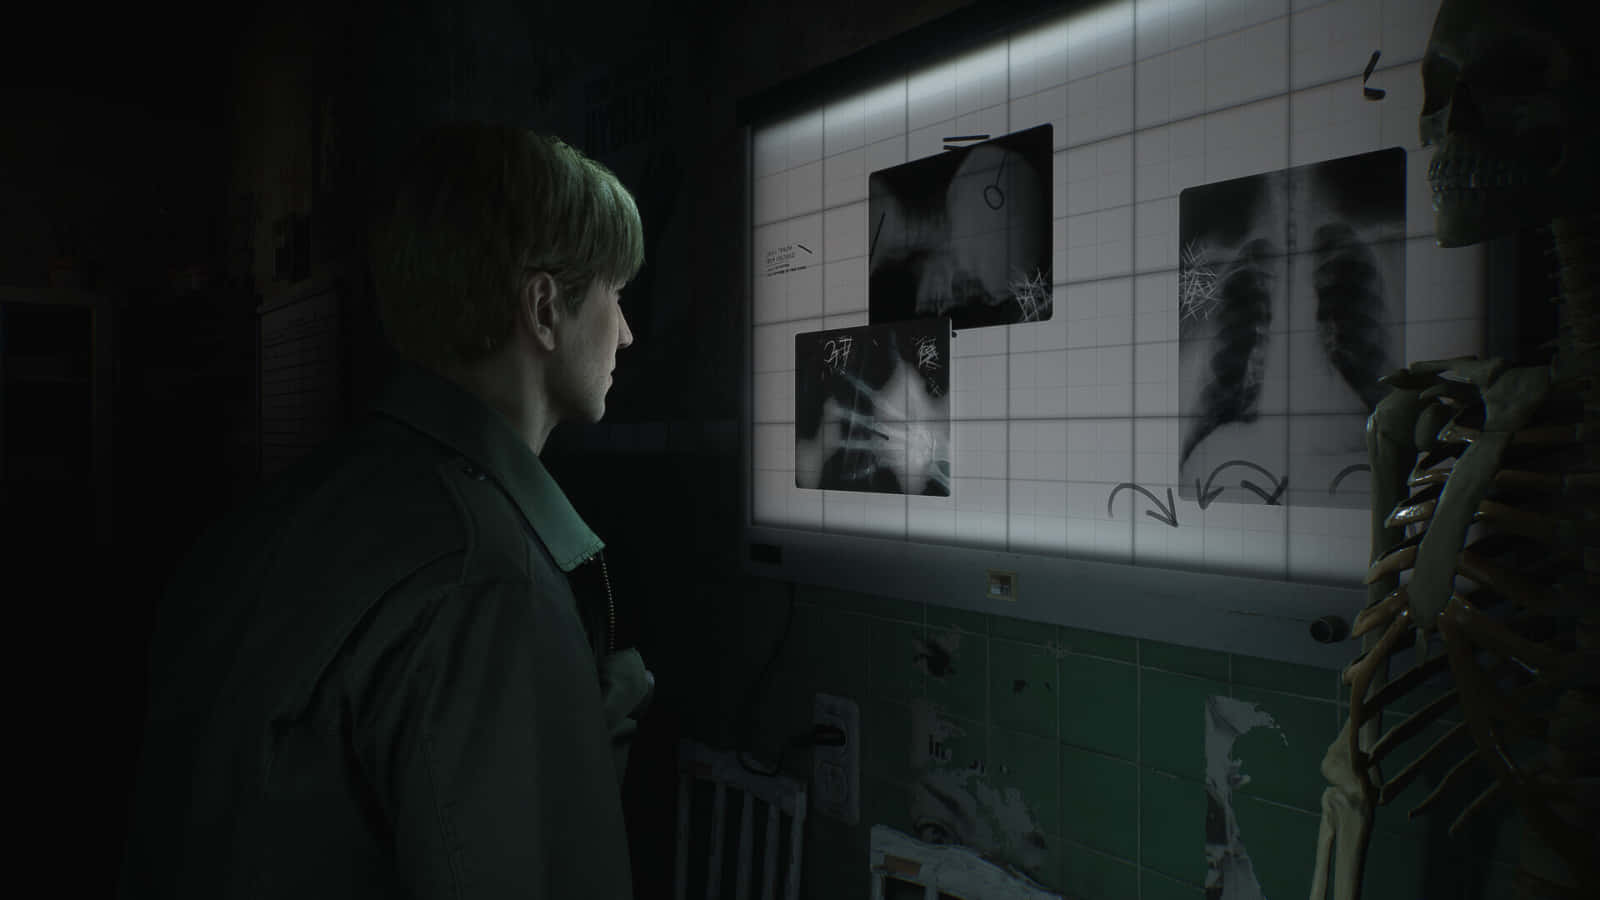 Descend into a dark and mysterious world in Silent Hill